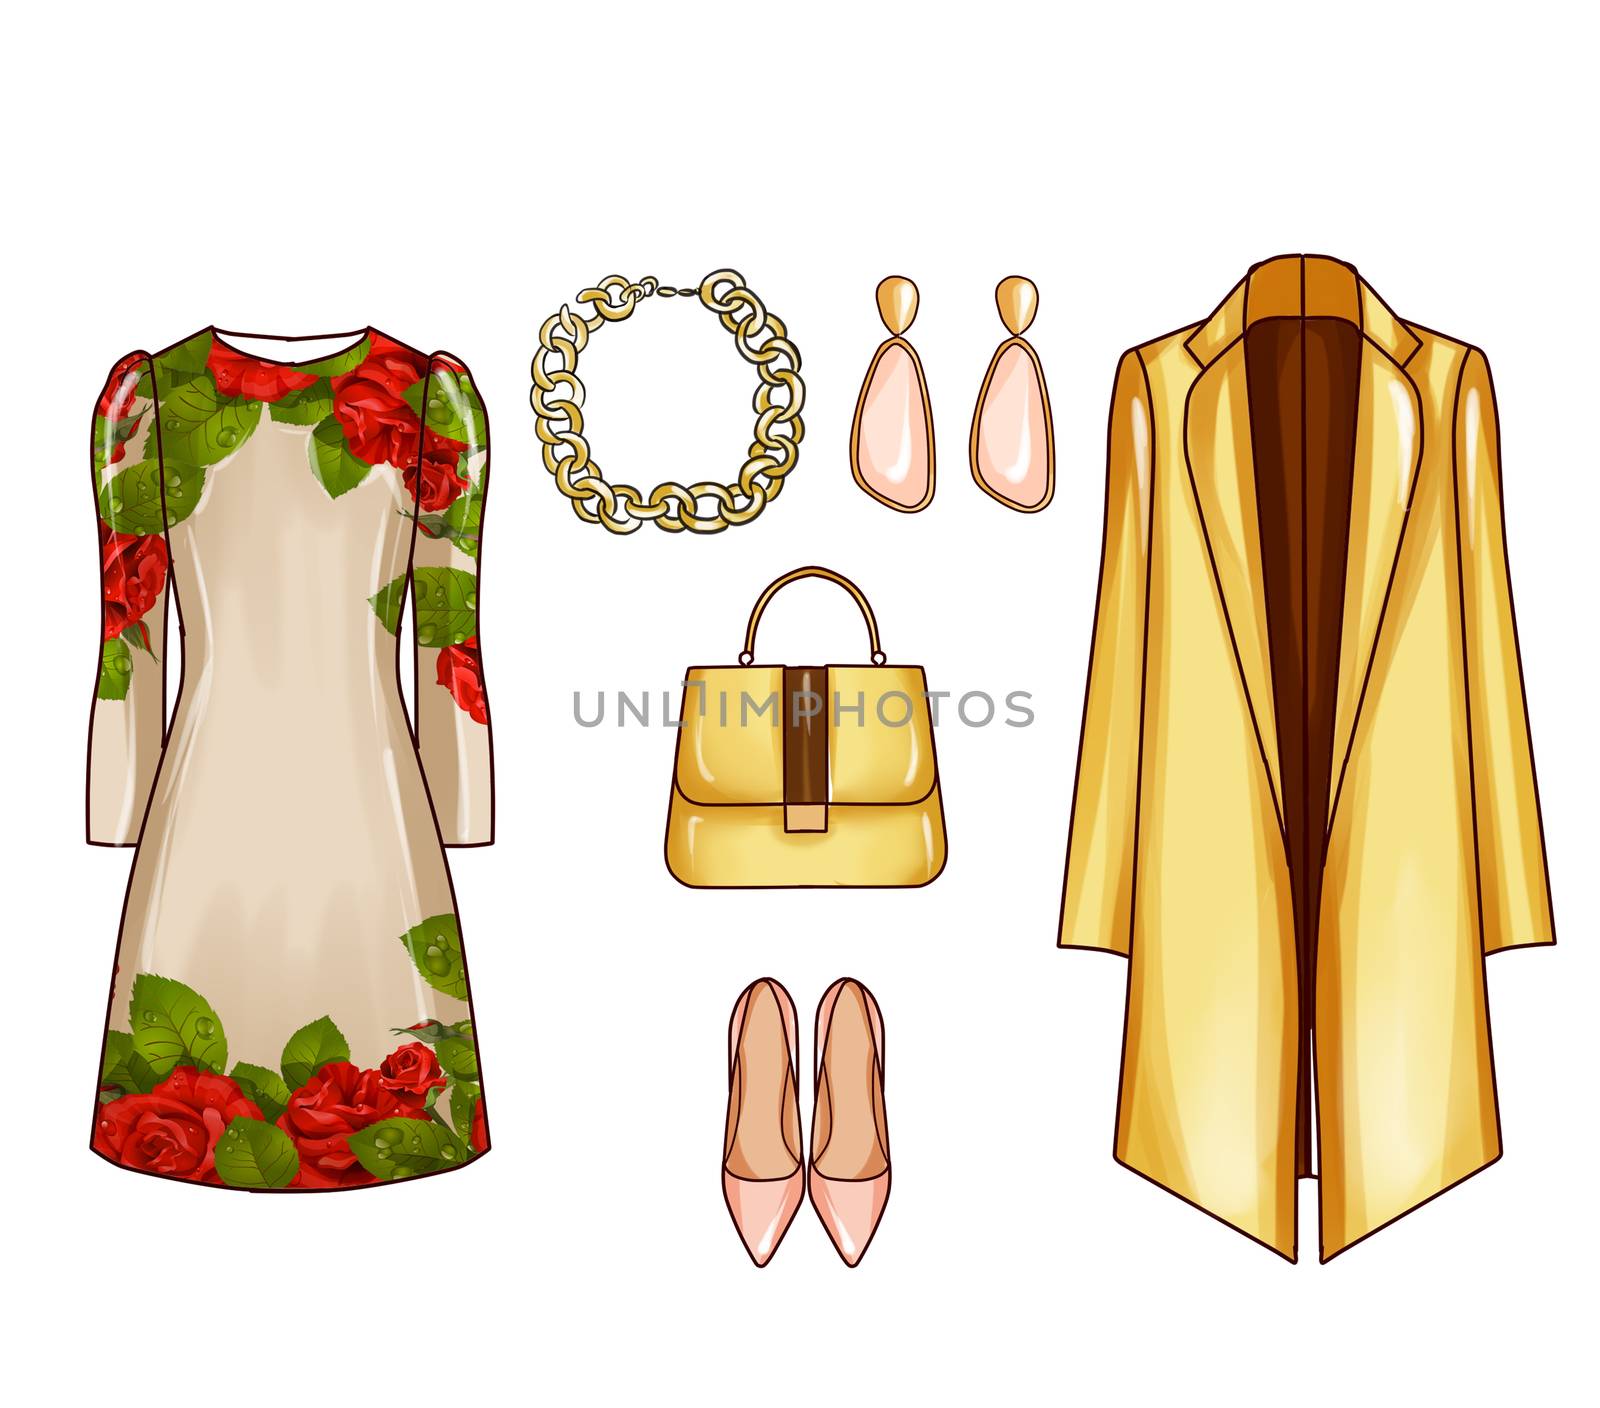 Fashion set of woman's clothes and accessories - Printed short dress, jewels, shoes, purse, , coat,